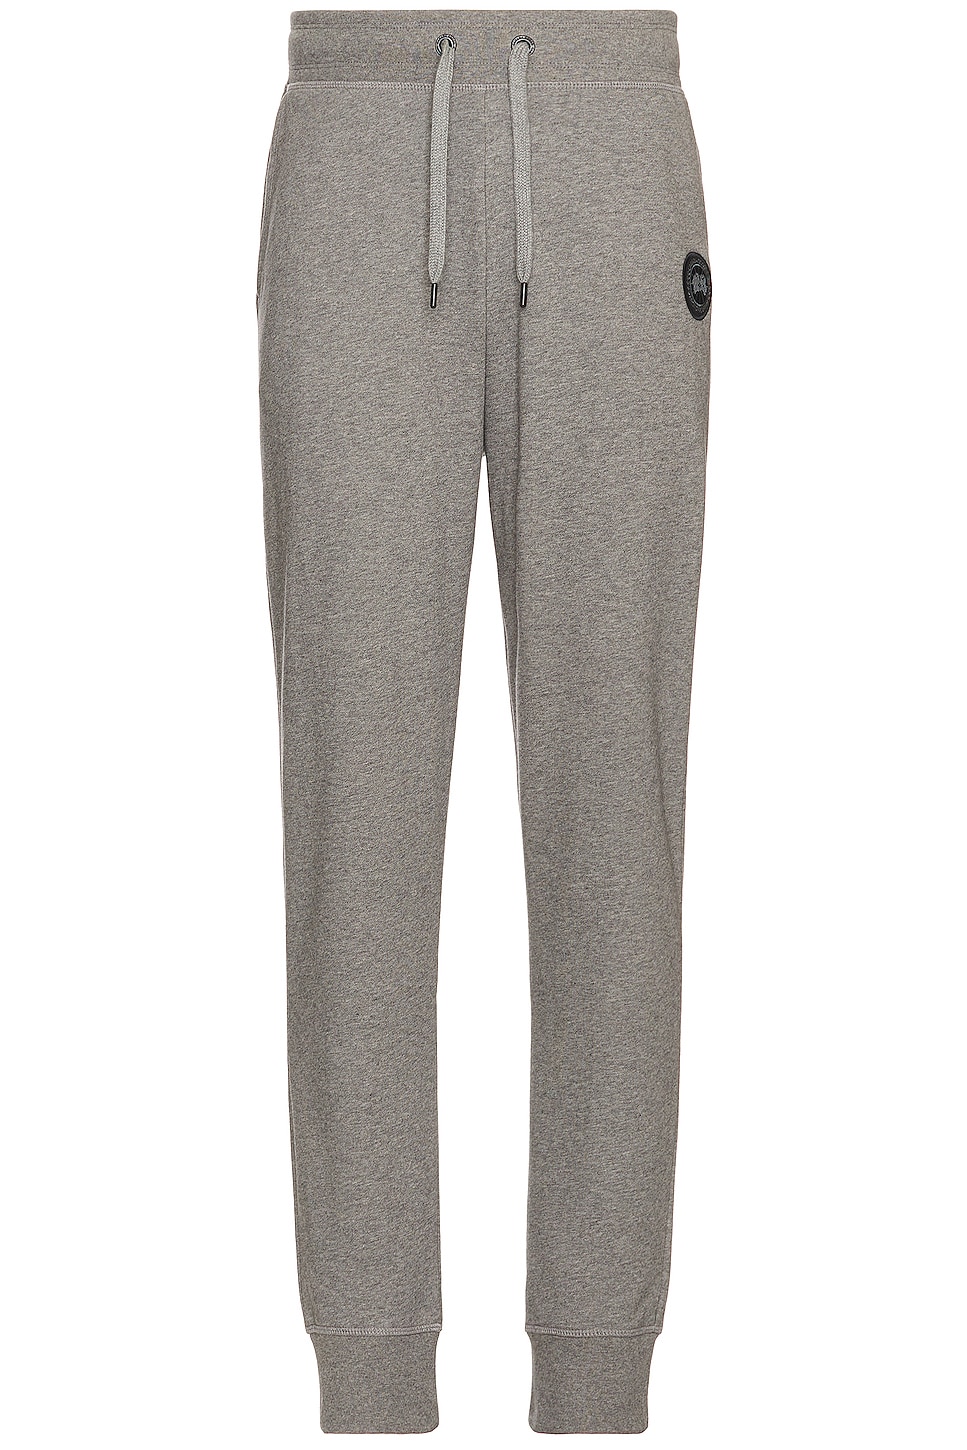 Image 1 of Canada Goose Huron Skinny Pant in Stone Heather